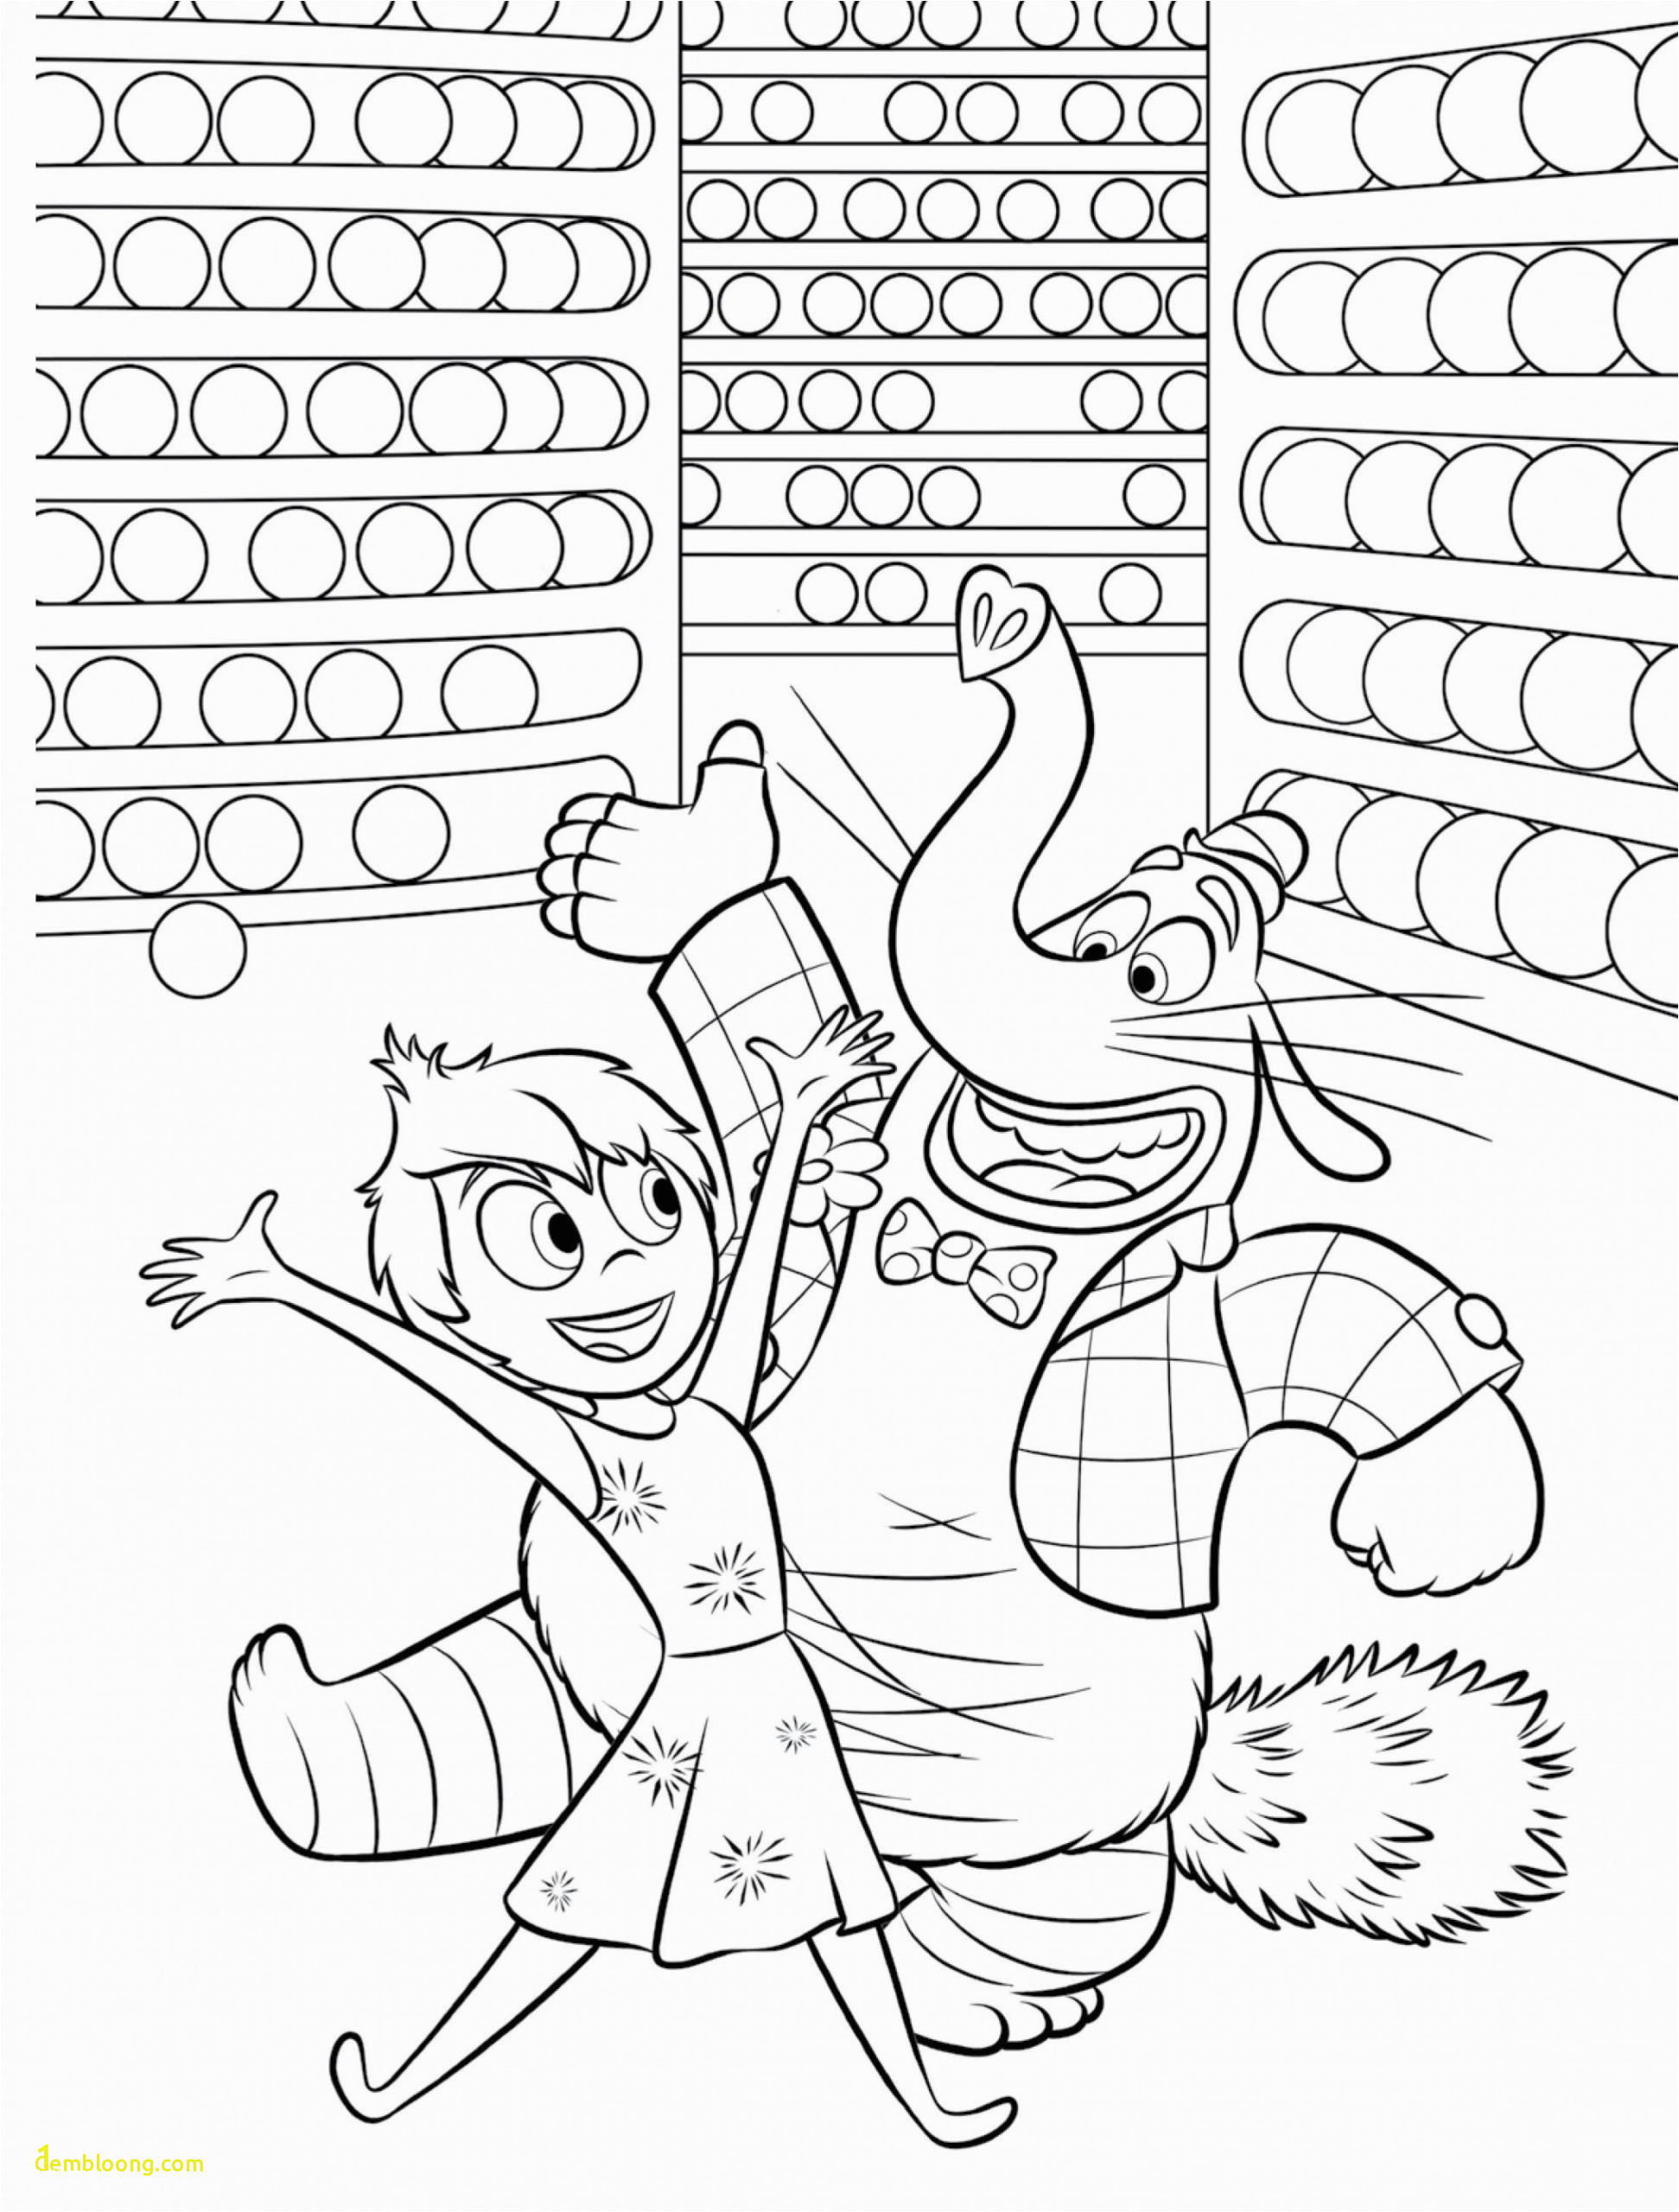 Coloring Pages for Kids Spring Coloring Pages Free Coloring Pages to Print for Kids